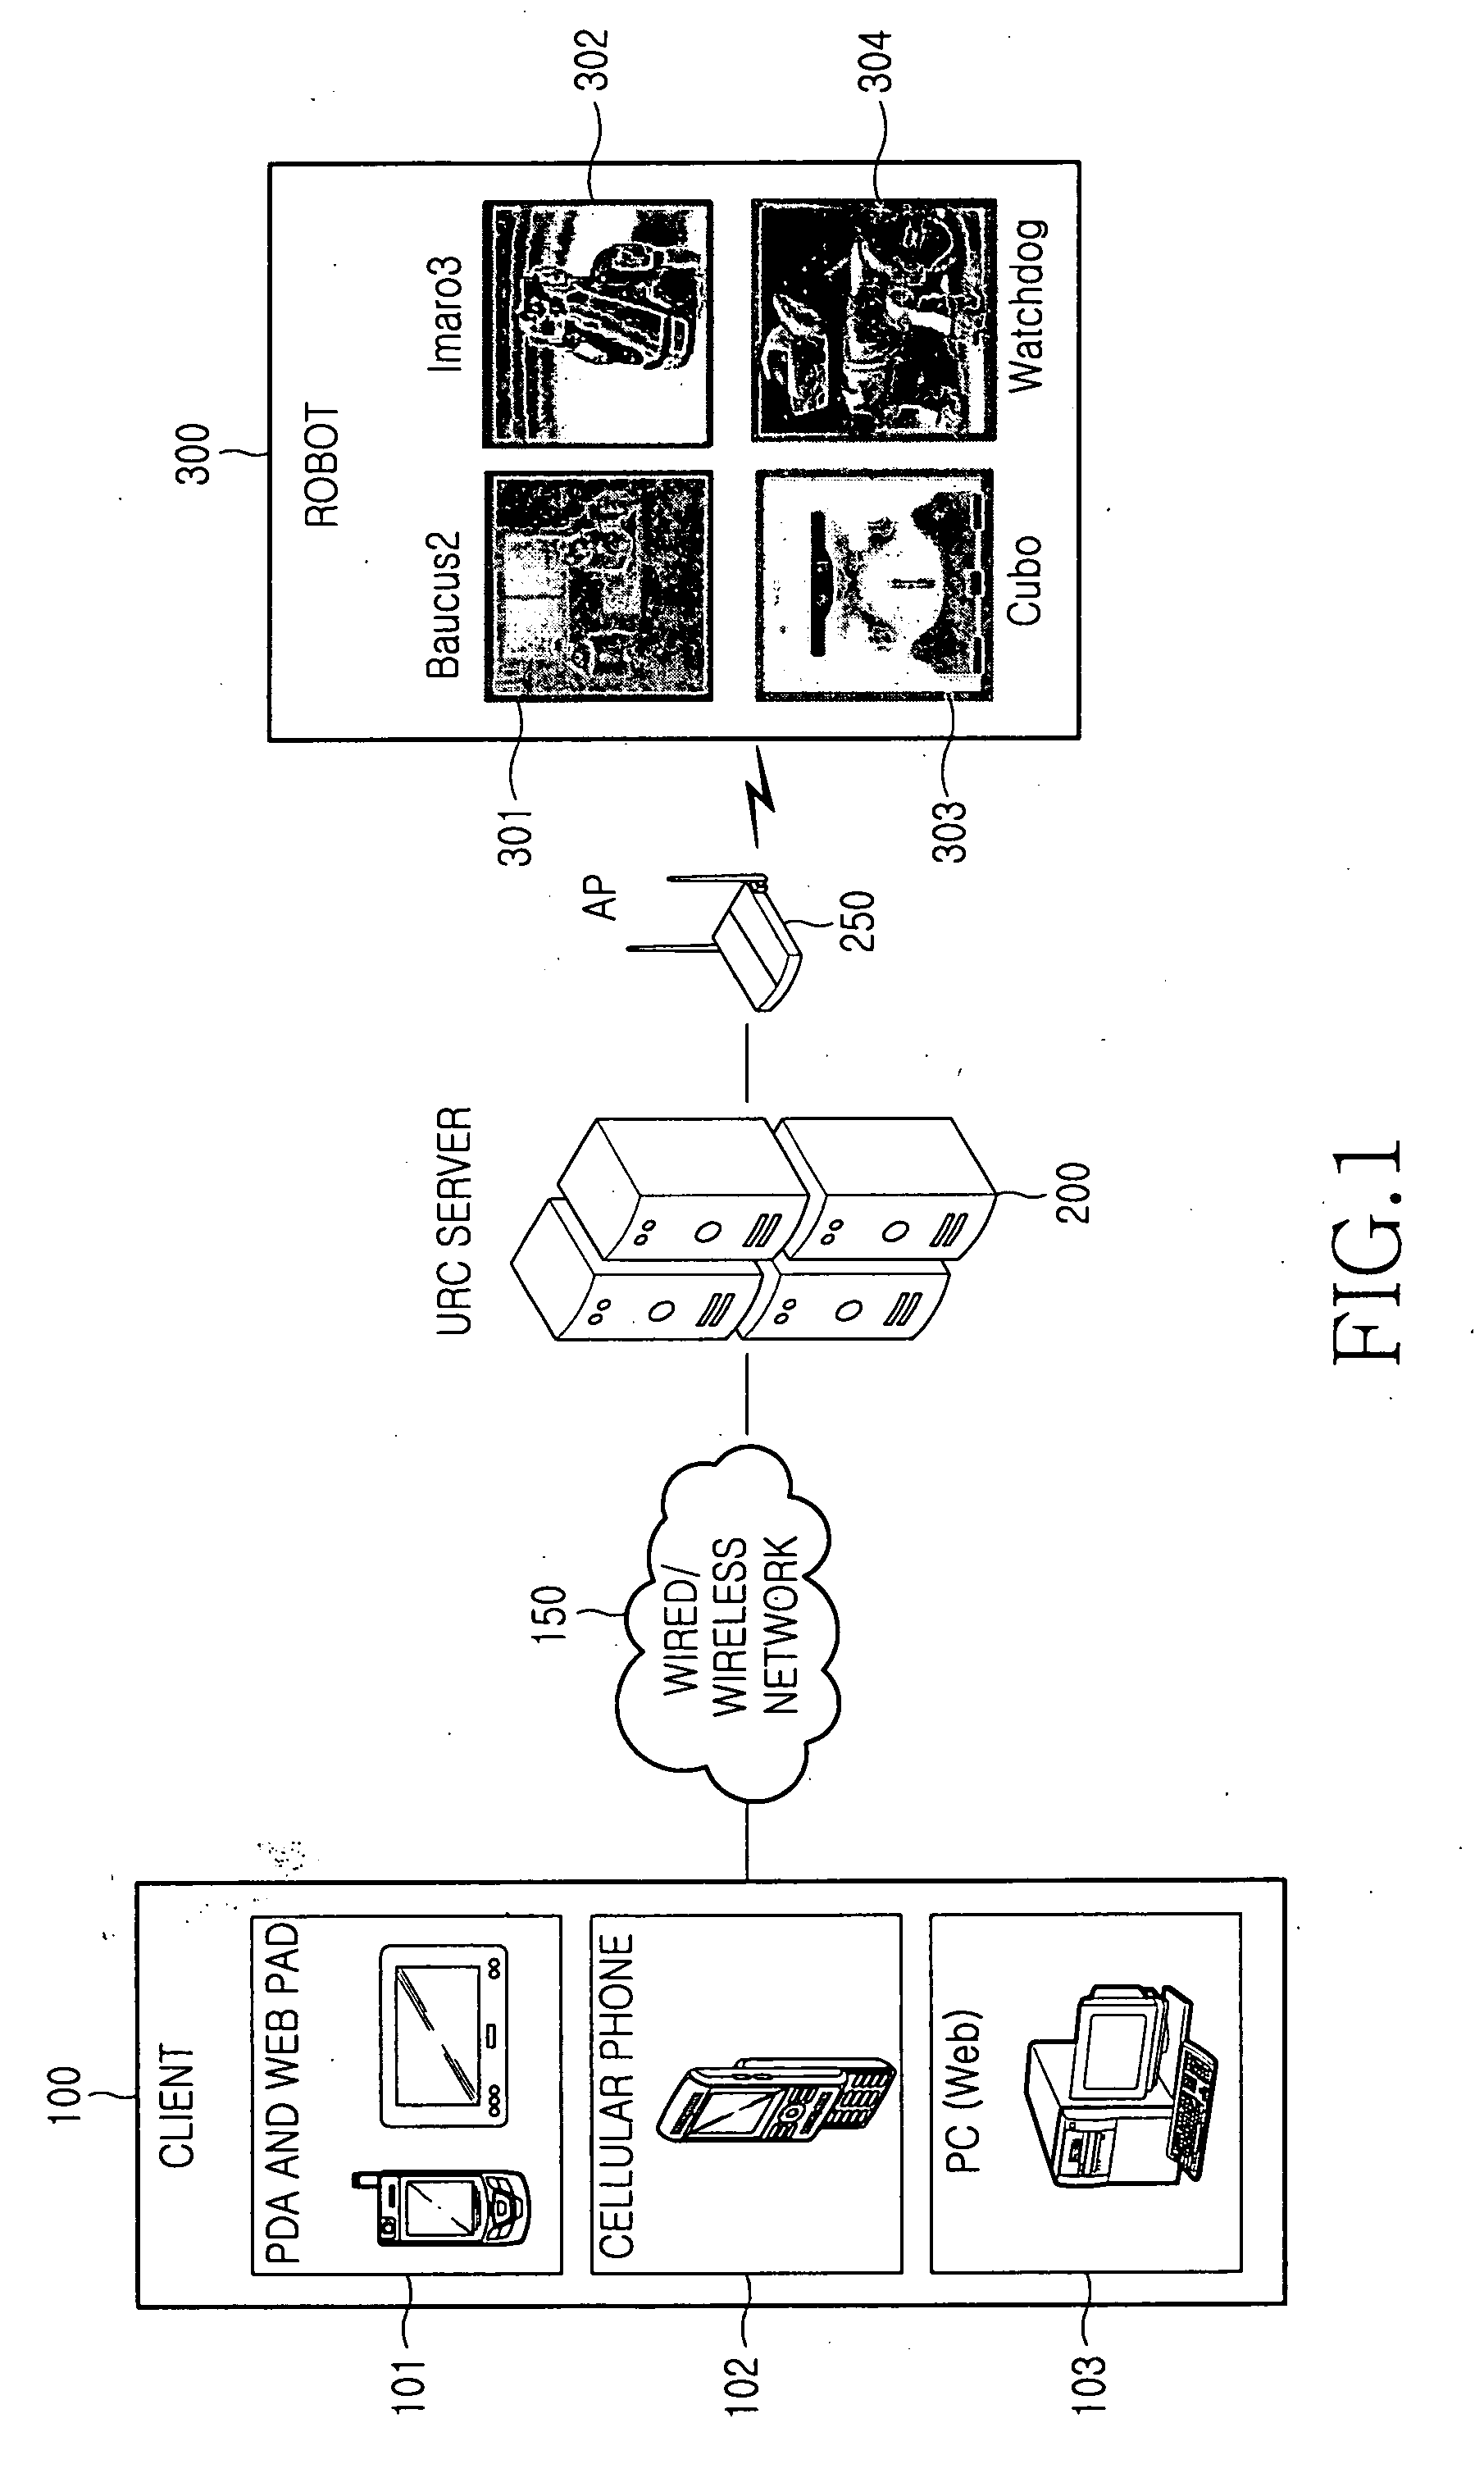 Network-based robot control system and robot velocity control method in the network-based robot control system